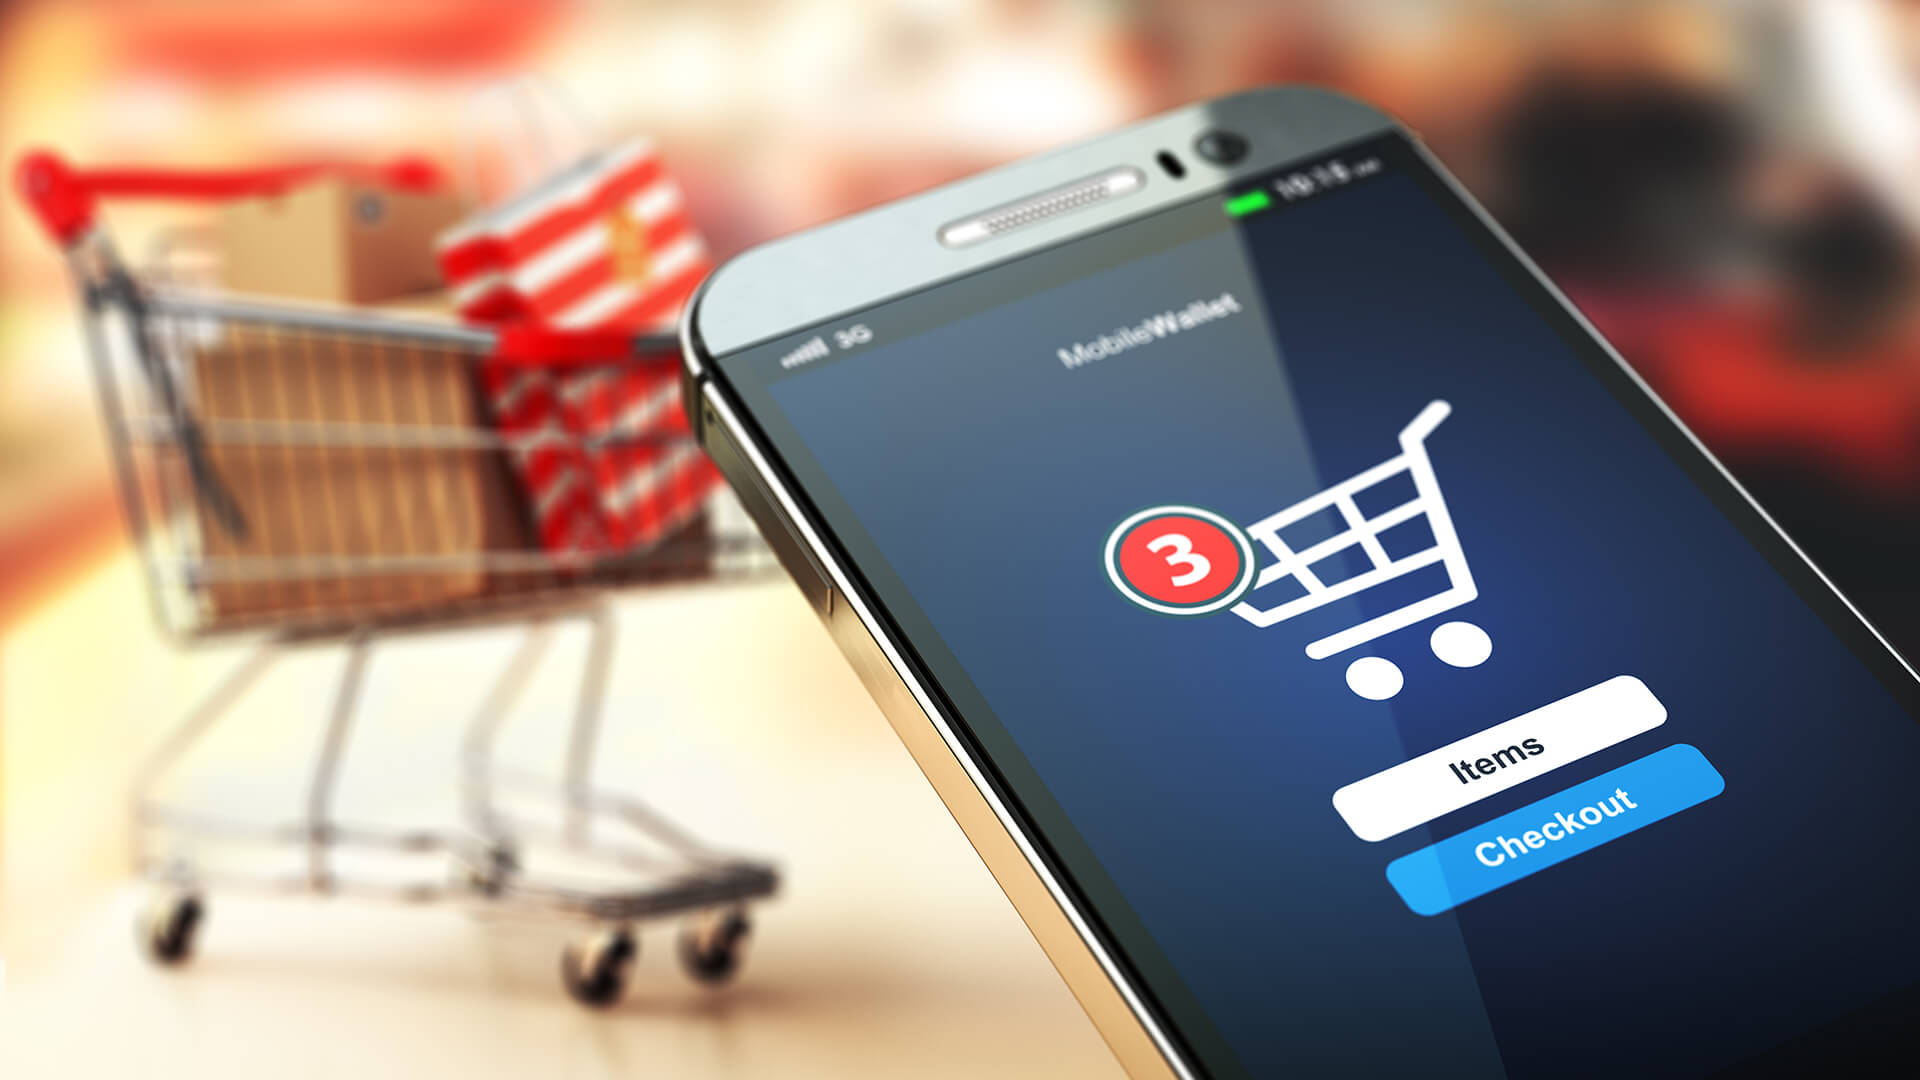 Accelerating Usage Of Portable Devices To Propel Global Mobile Commerce (M-Commerce) Market Growth